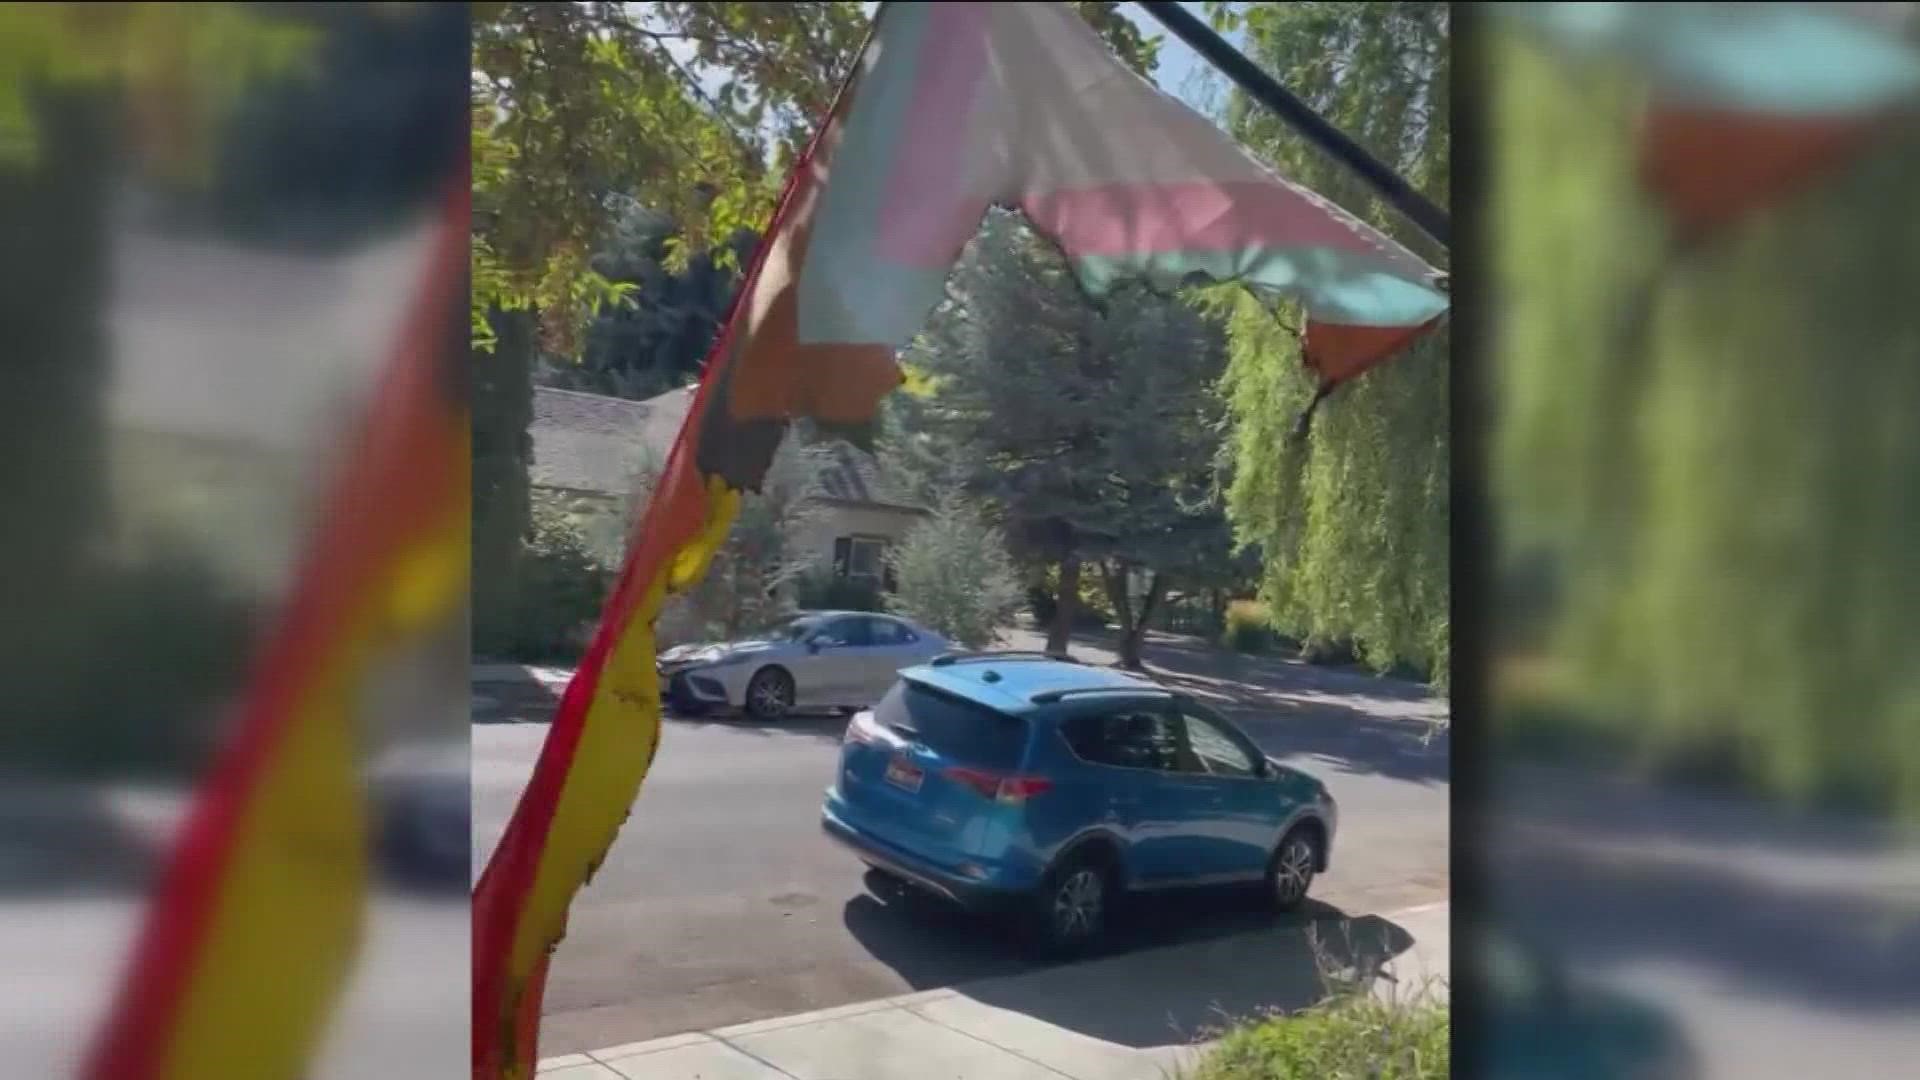 A Boise man that faces three counts of felony aggravated assault has now been charged with arson in connection to the LGBTQIA+ flag burning on Brumback Street.